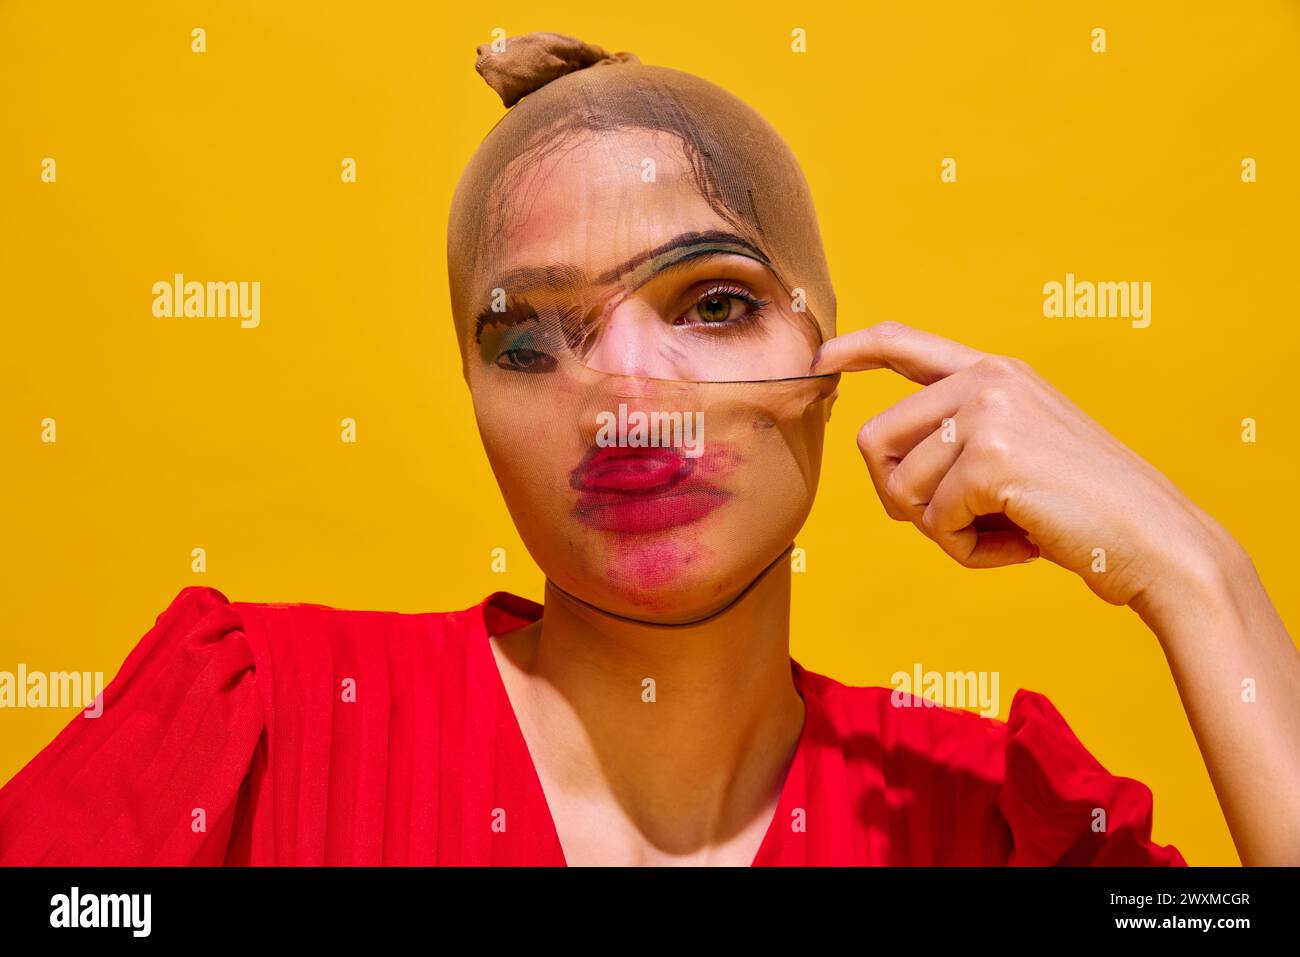 Young woman with stocking over head with smudged lipstick makeup against yellow background. Close-up. Secrets Stock Photo